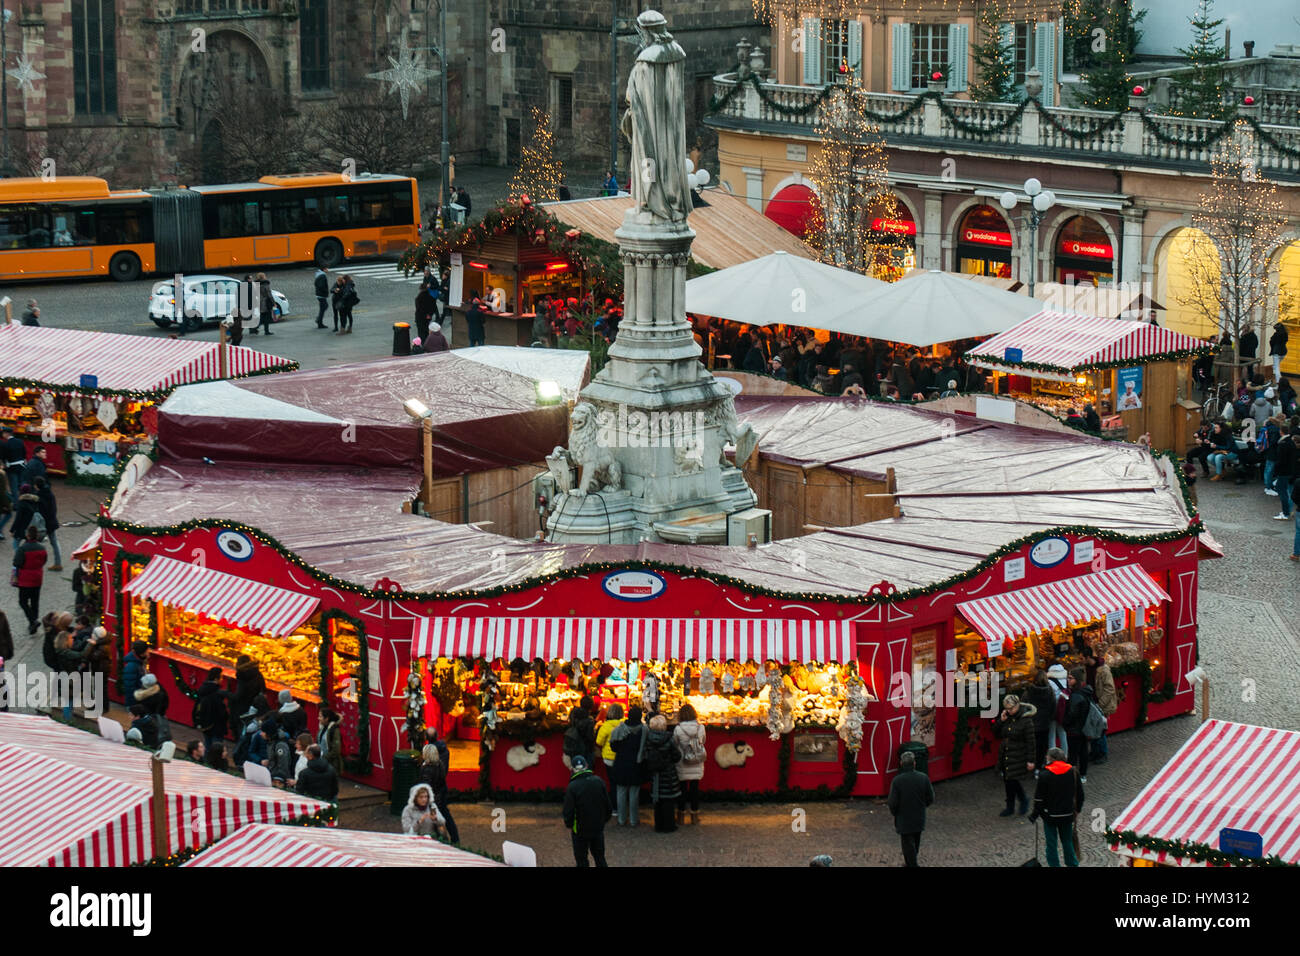 A view of the statue with the traditional Christmas markets of Bolzano, in Italy. Stock Photo